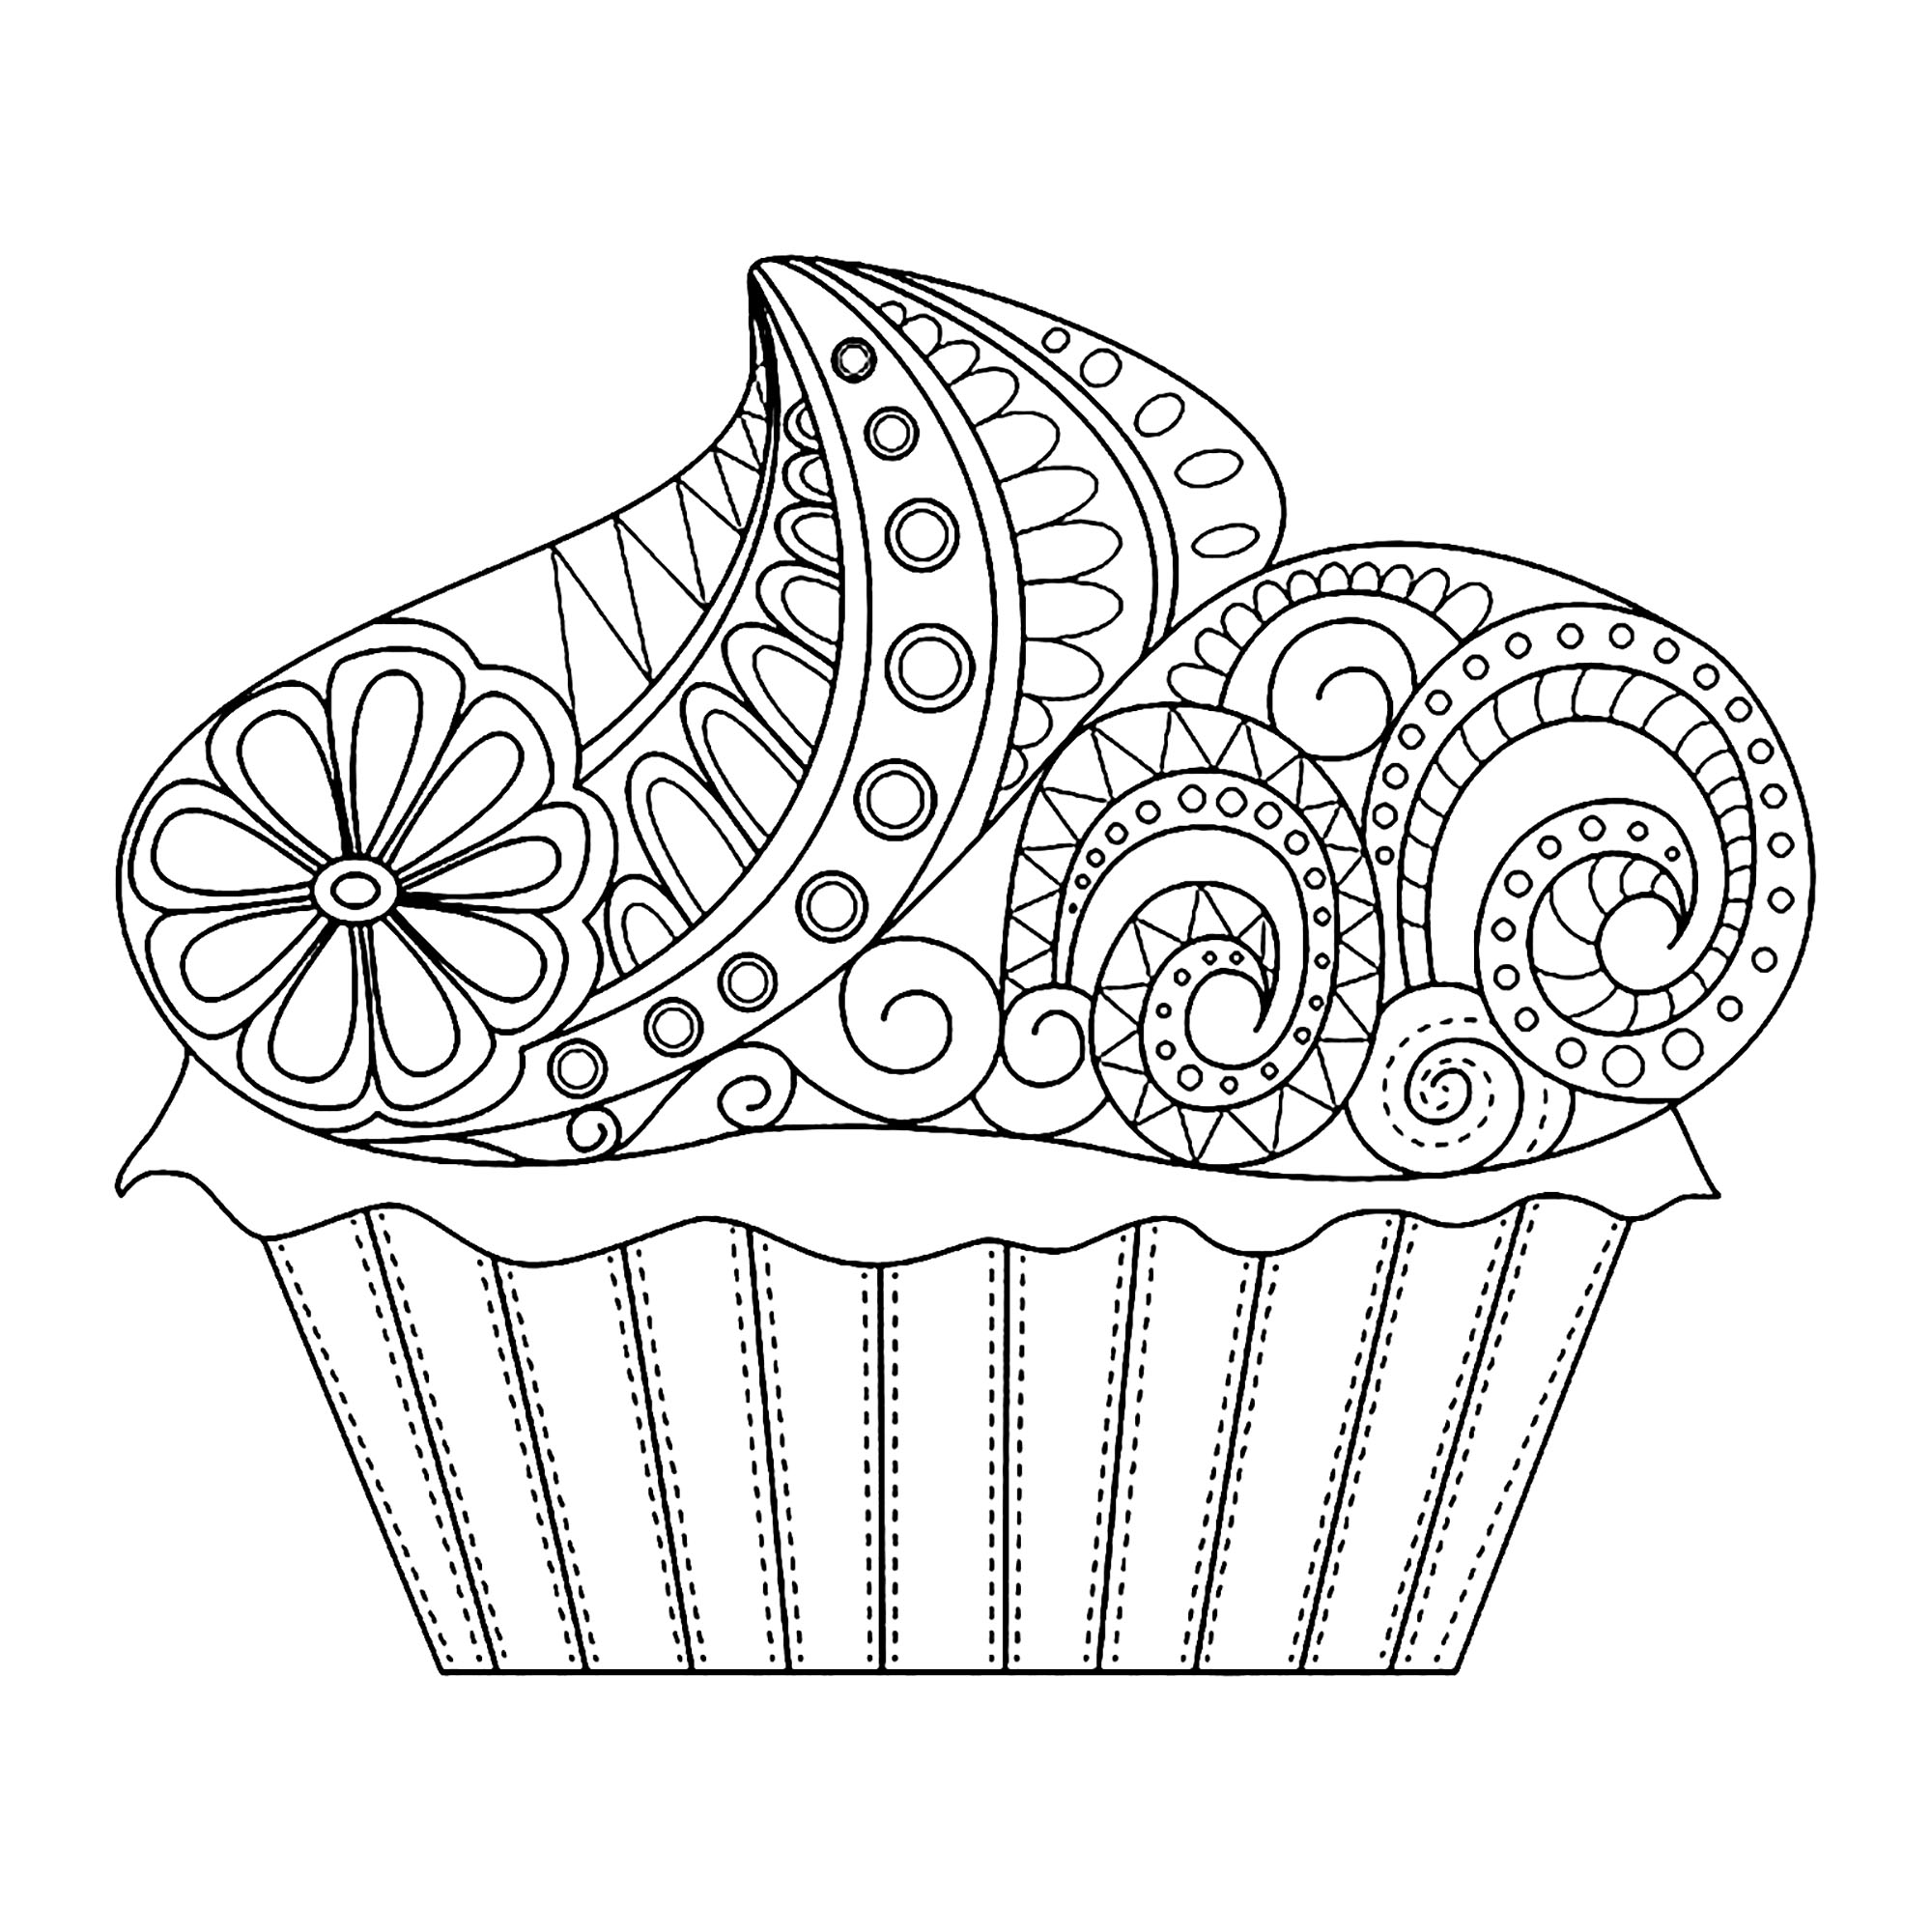 This spring cupcake is a perfect coloring for the season !, Artist : Anna Solyannnikova ;$SOURCE$ 123rf